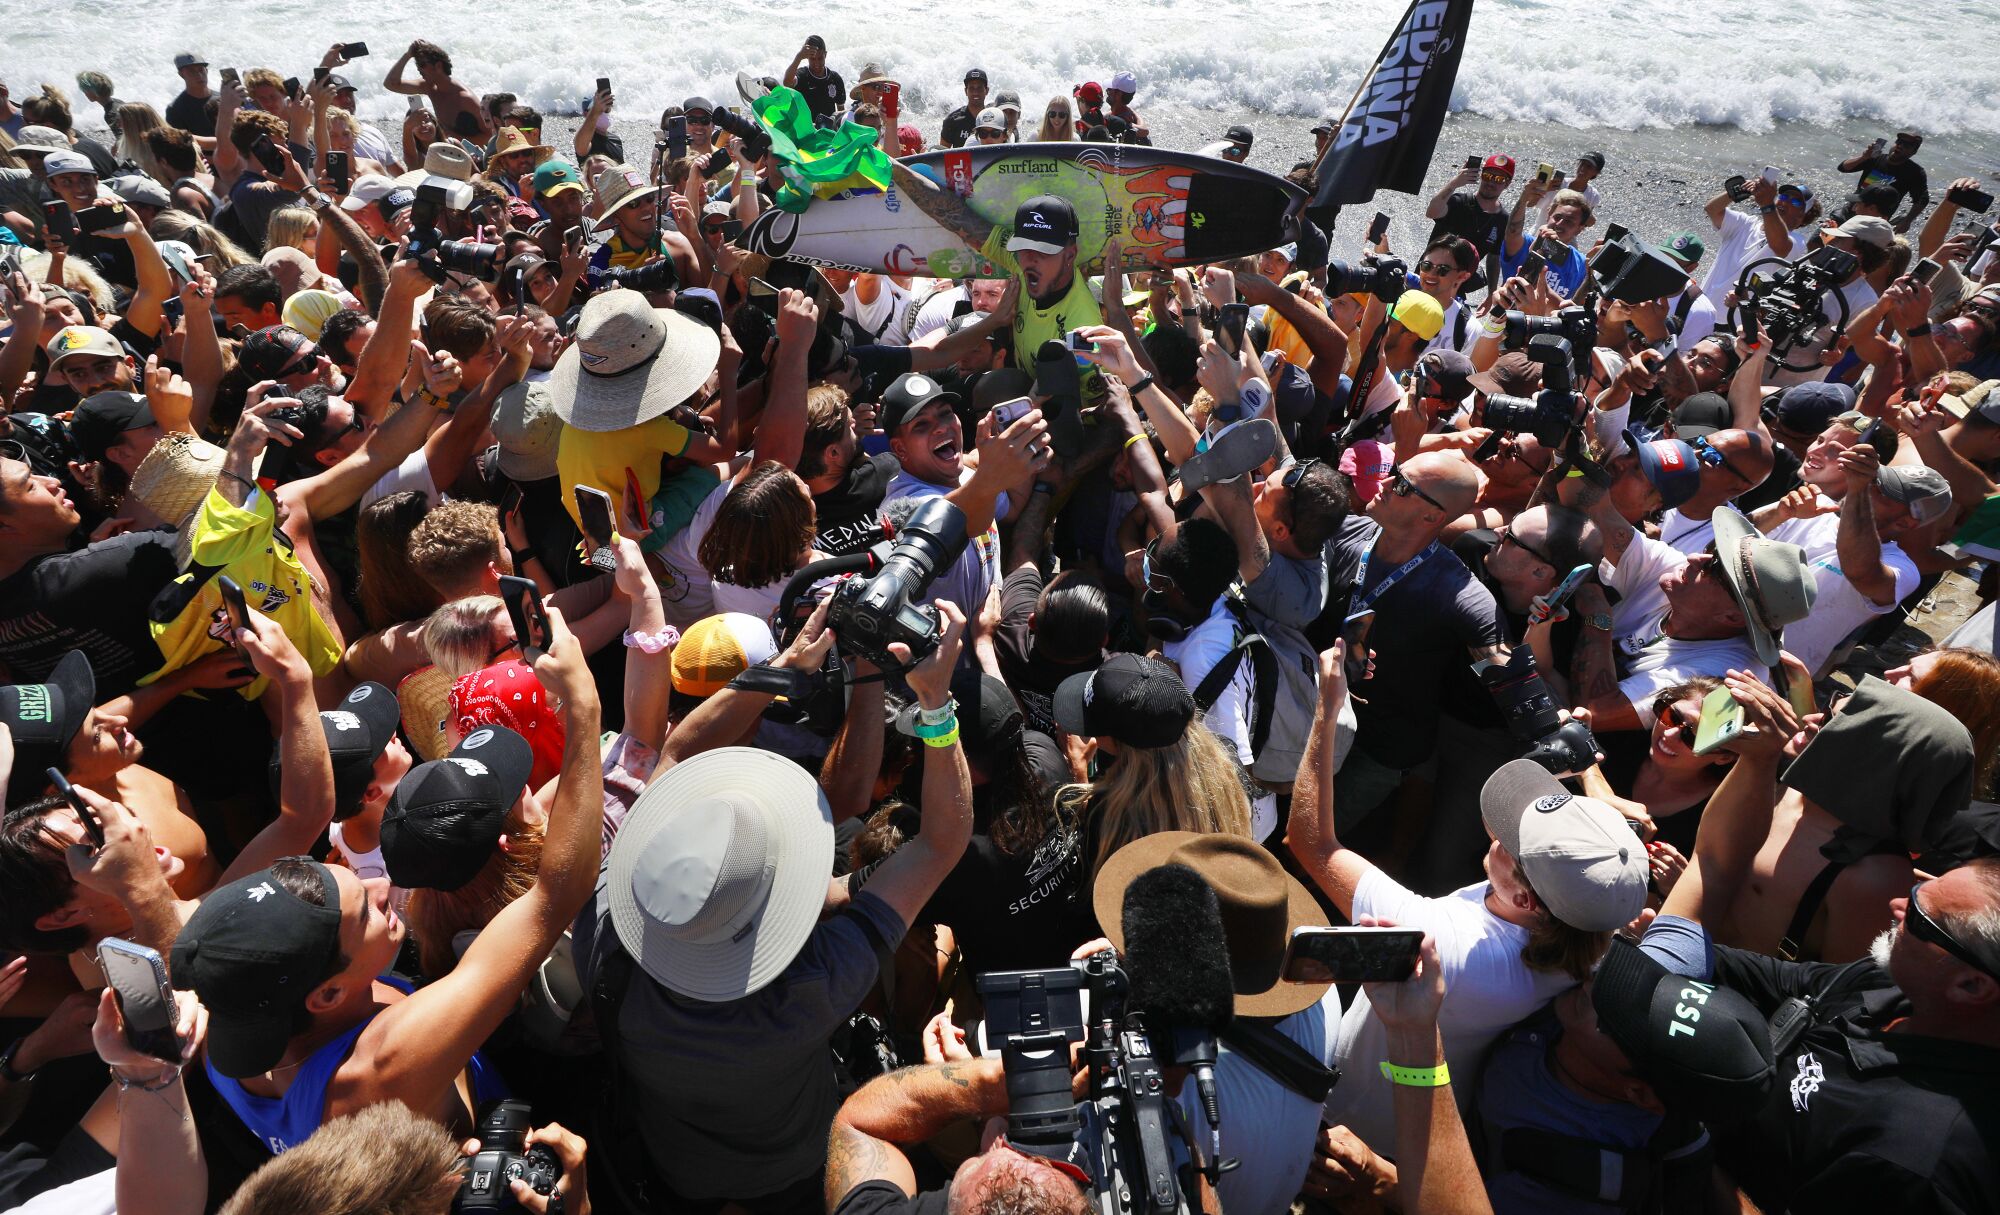 Gabriel Medina of Brazil celebrates with fans after he won the world championship at the World Surf 